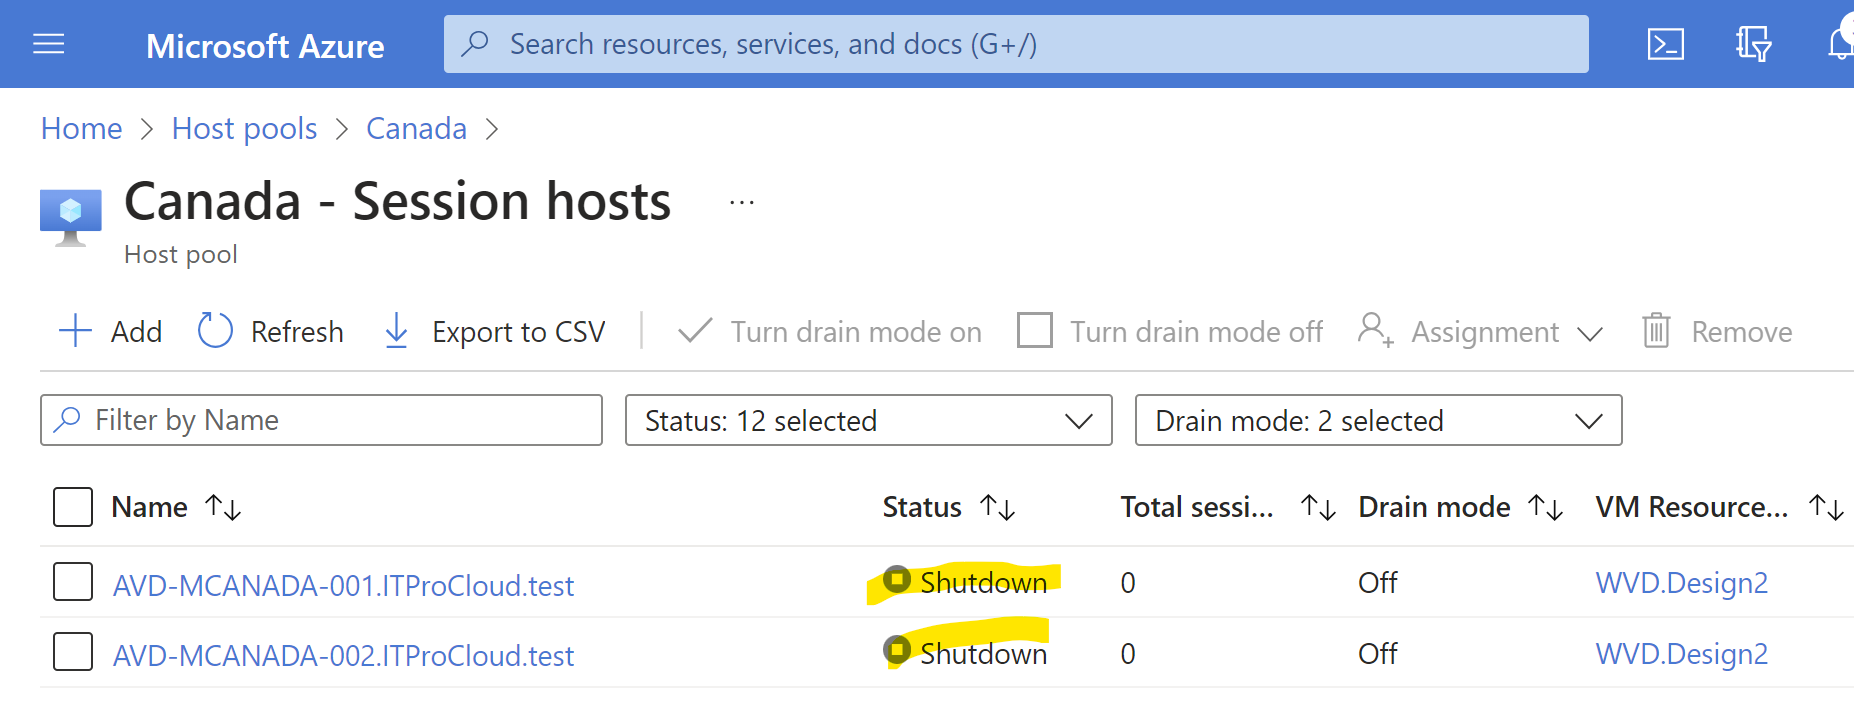 Session hosts are not available in Azure Virtual Desktop, but VMs are running. 